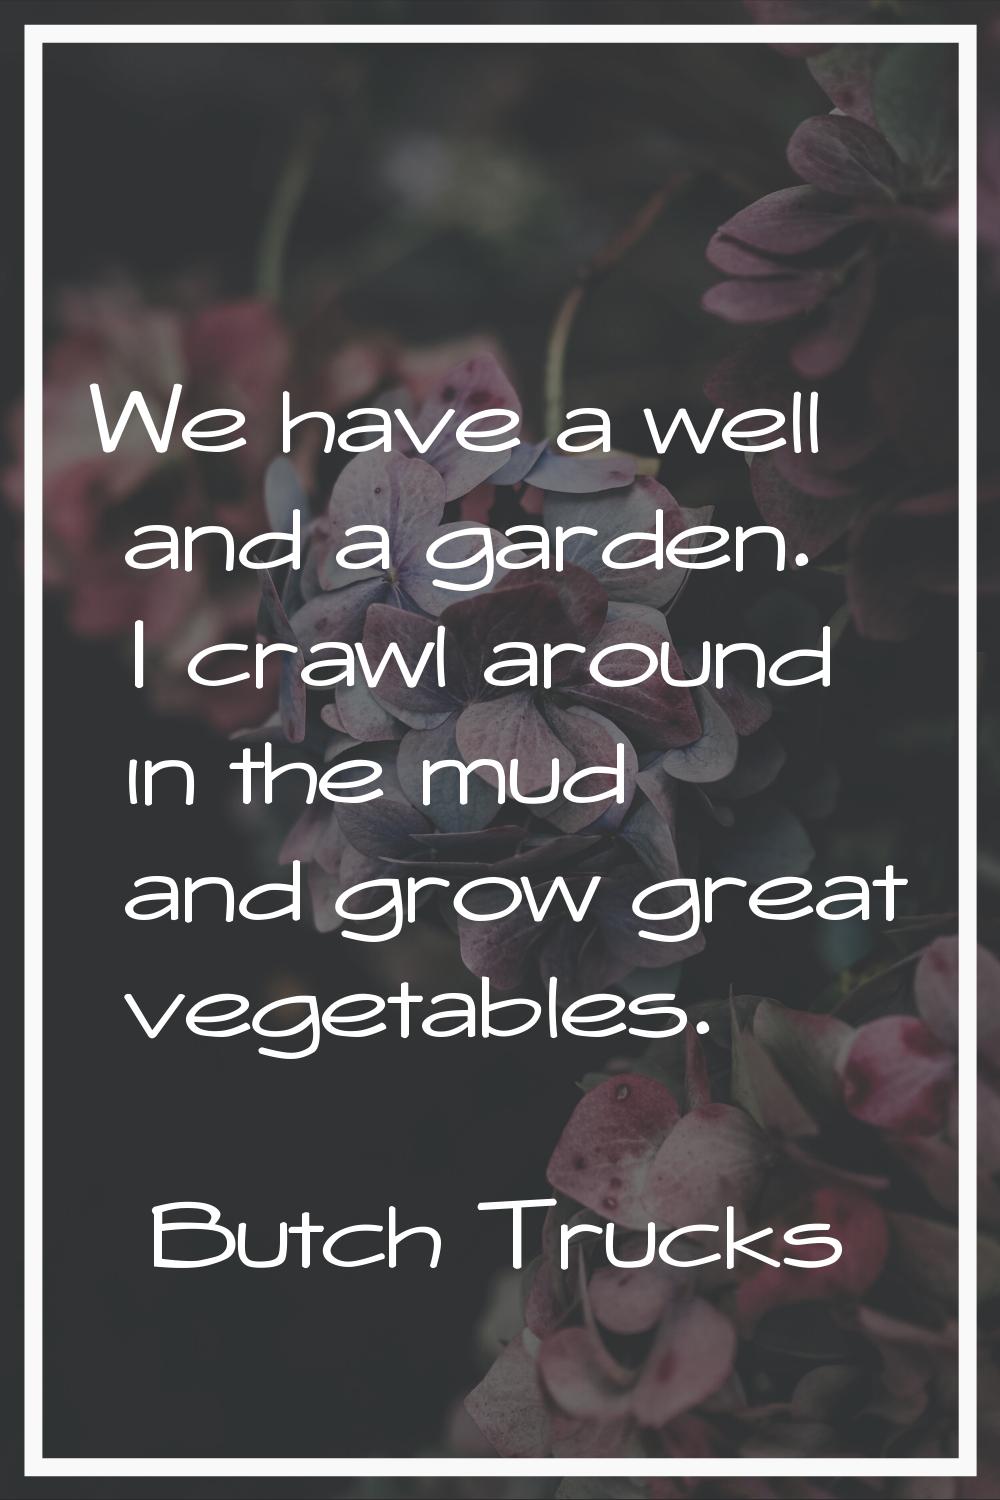 We have a well and a garden. I crawl around in the mud and grow great vegetables.